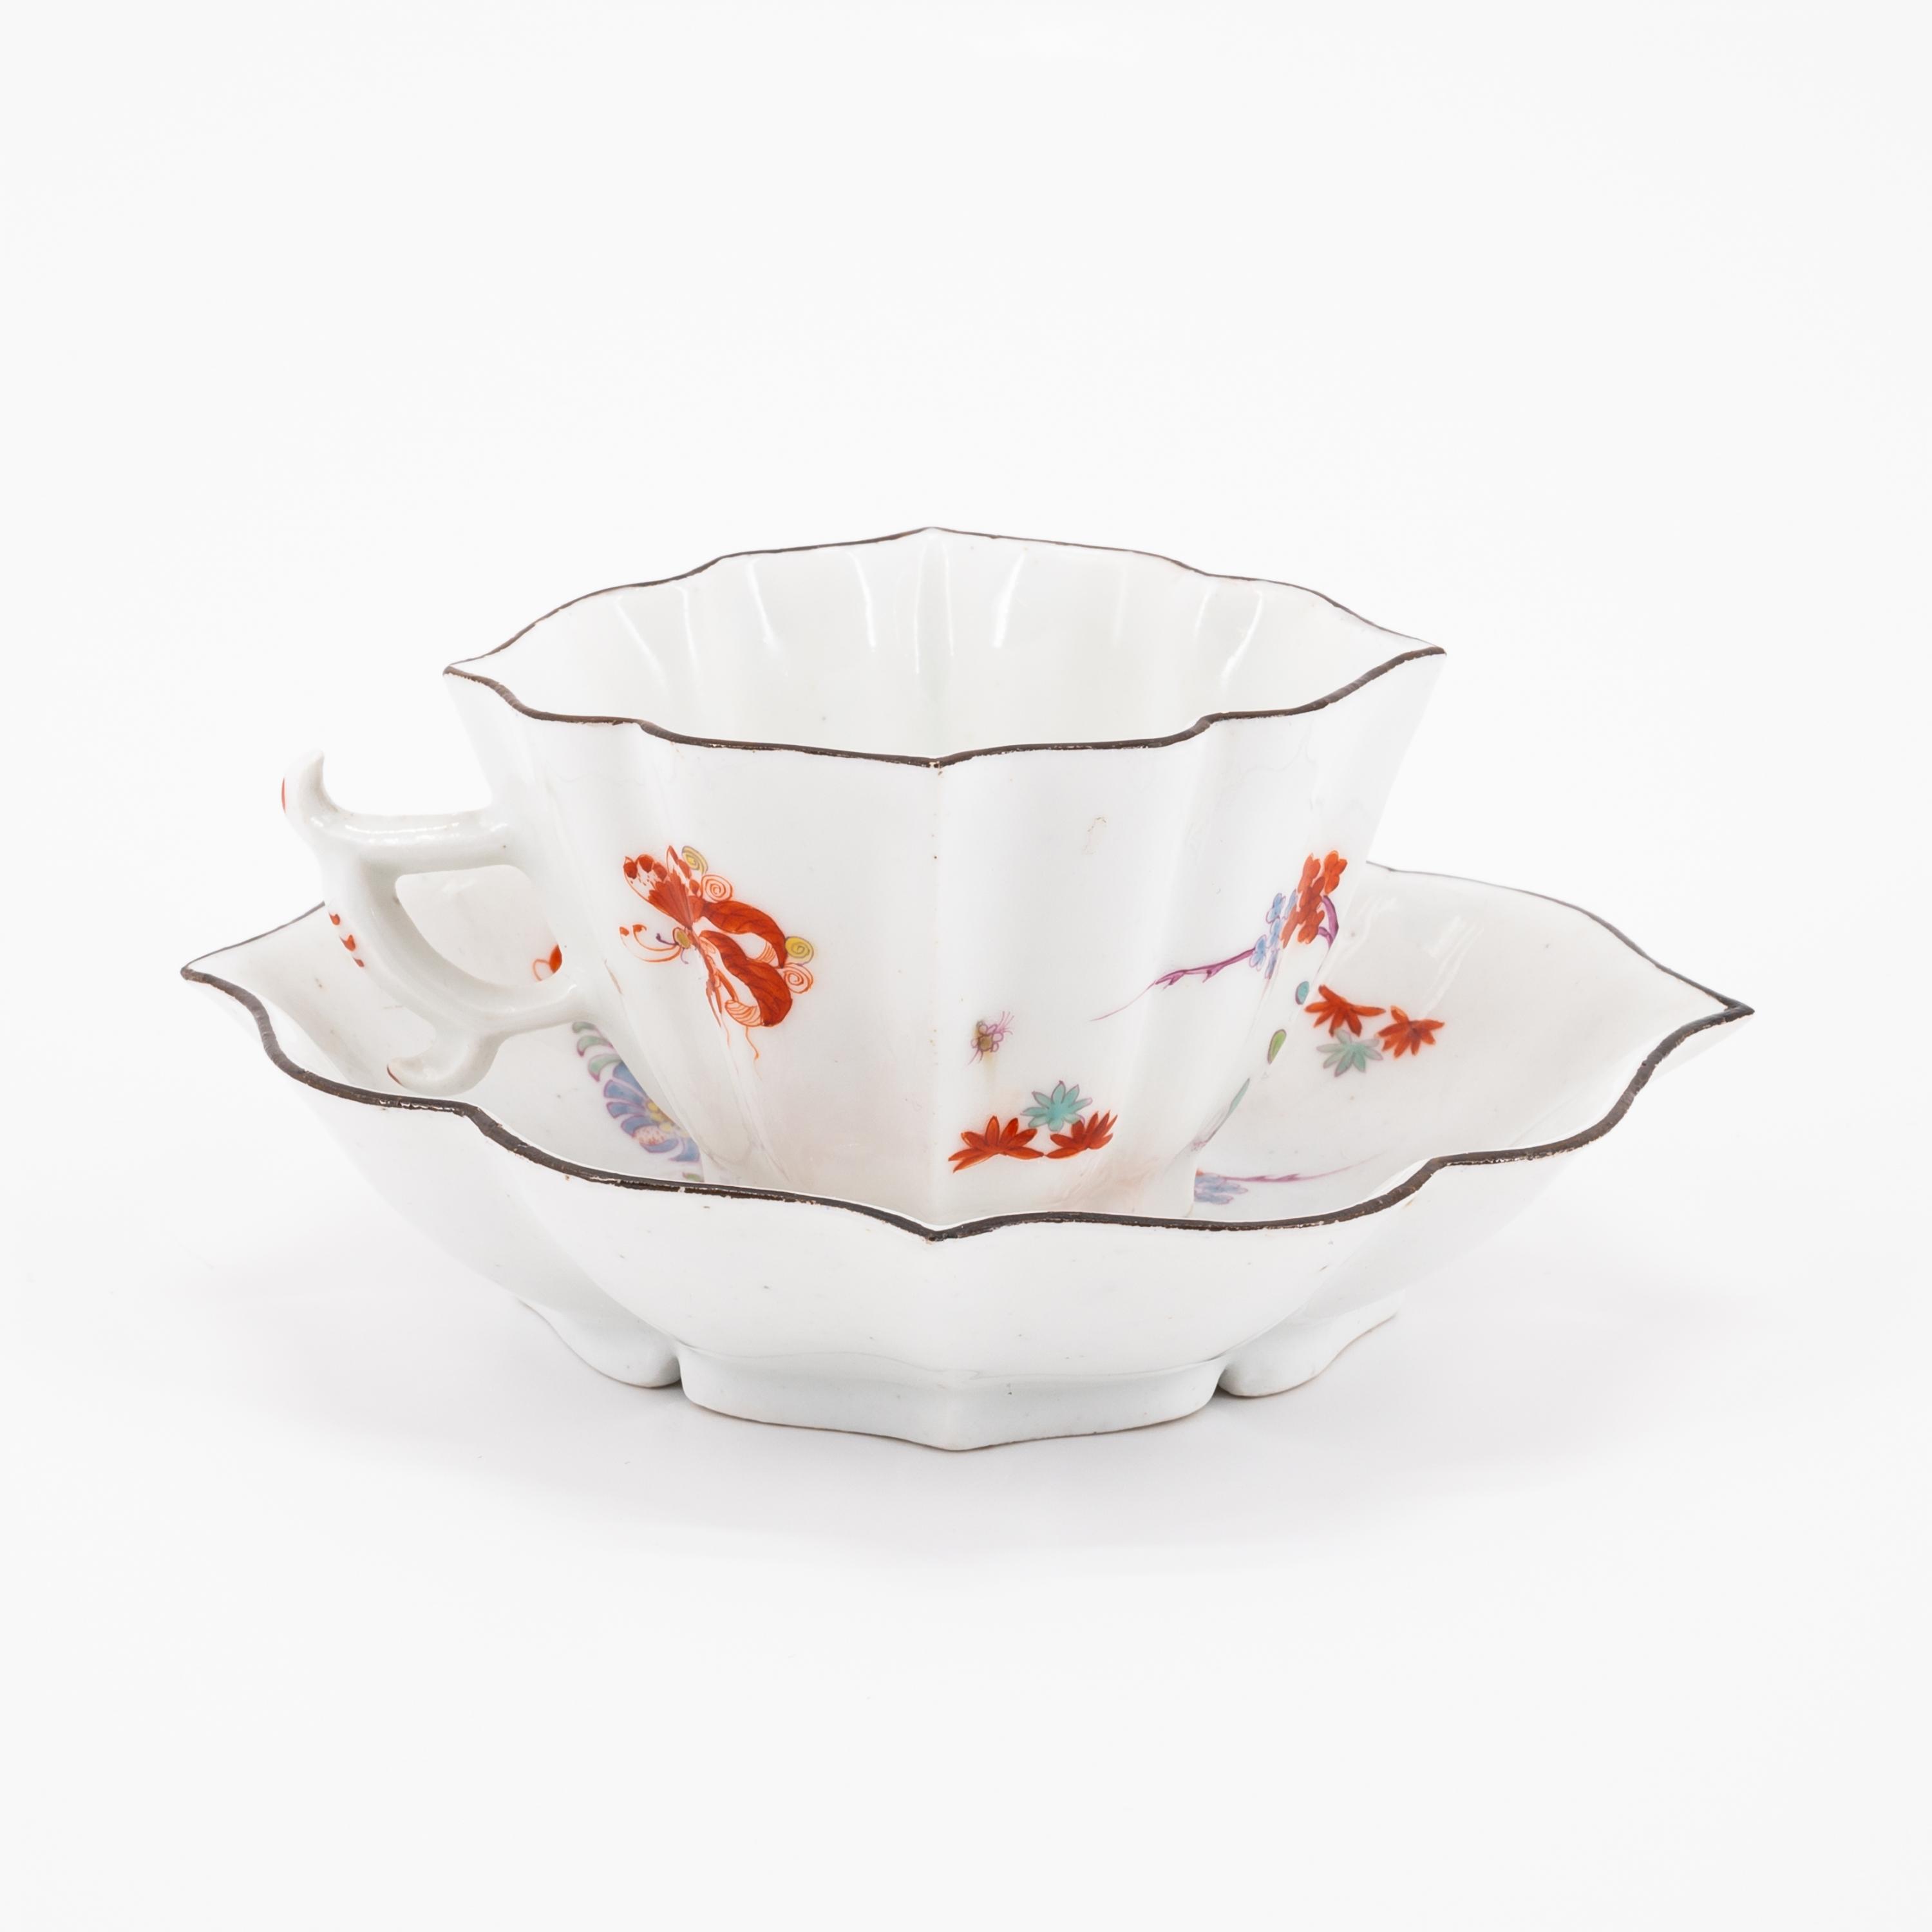 SCALLOPED PORCELAIN CUPS AND SAUCERS WITH KAKIEMON DECOR - Image 3 of 6